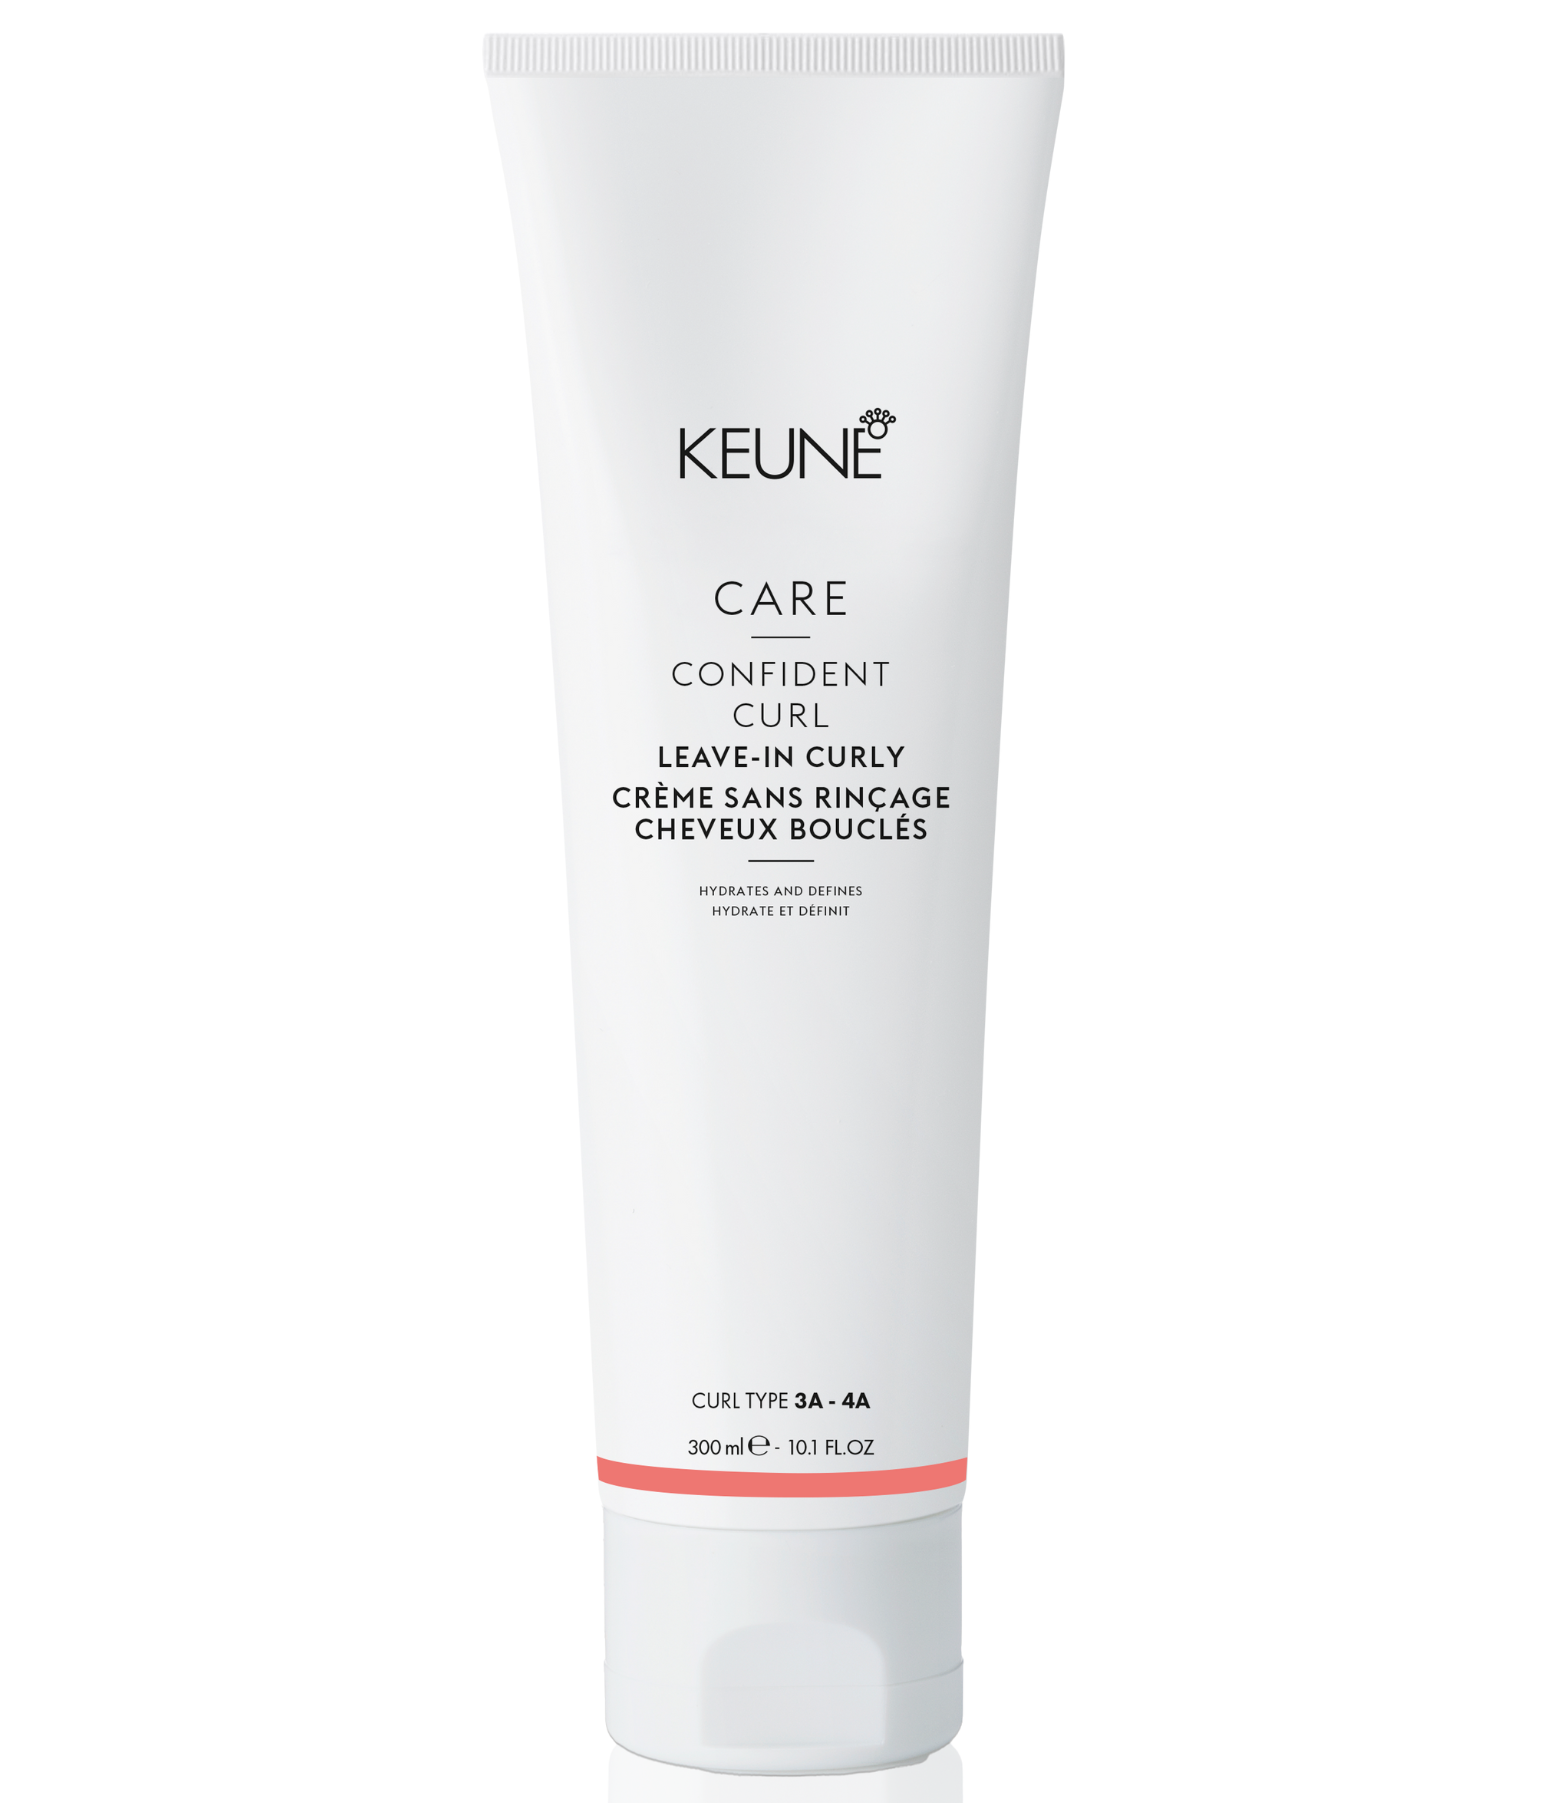 CARE Confident Curl Leave-in Curly is ultra-rich curl cream provides elasticity for your coarse curls. Discover the best hair care products for curly hair on keune.ch.